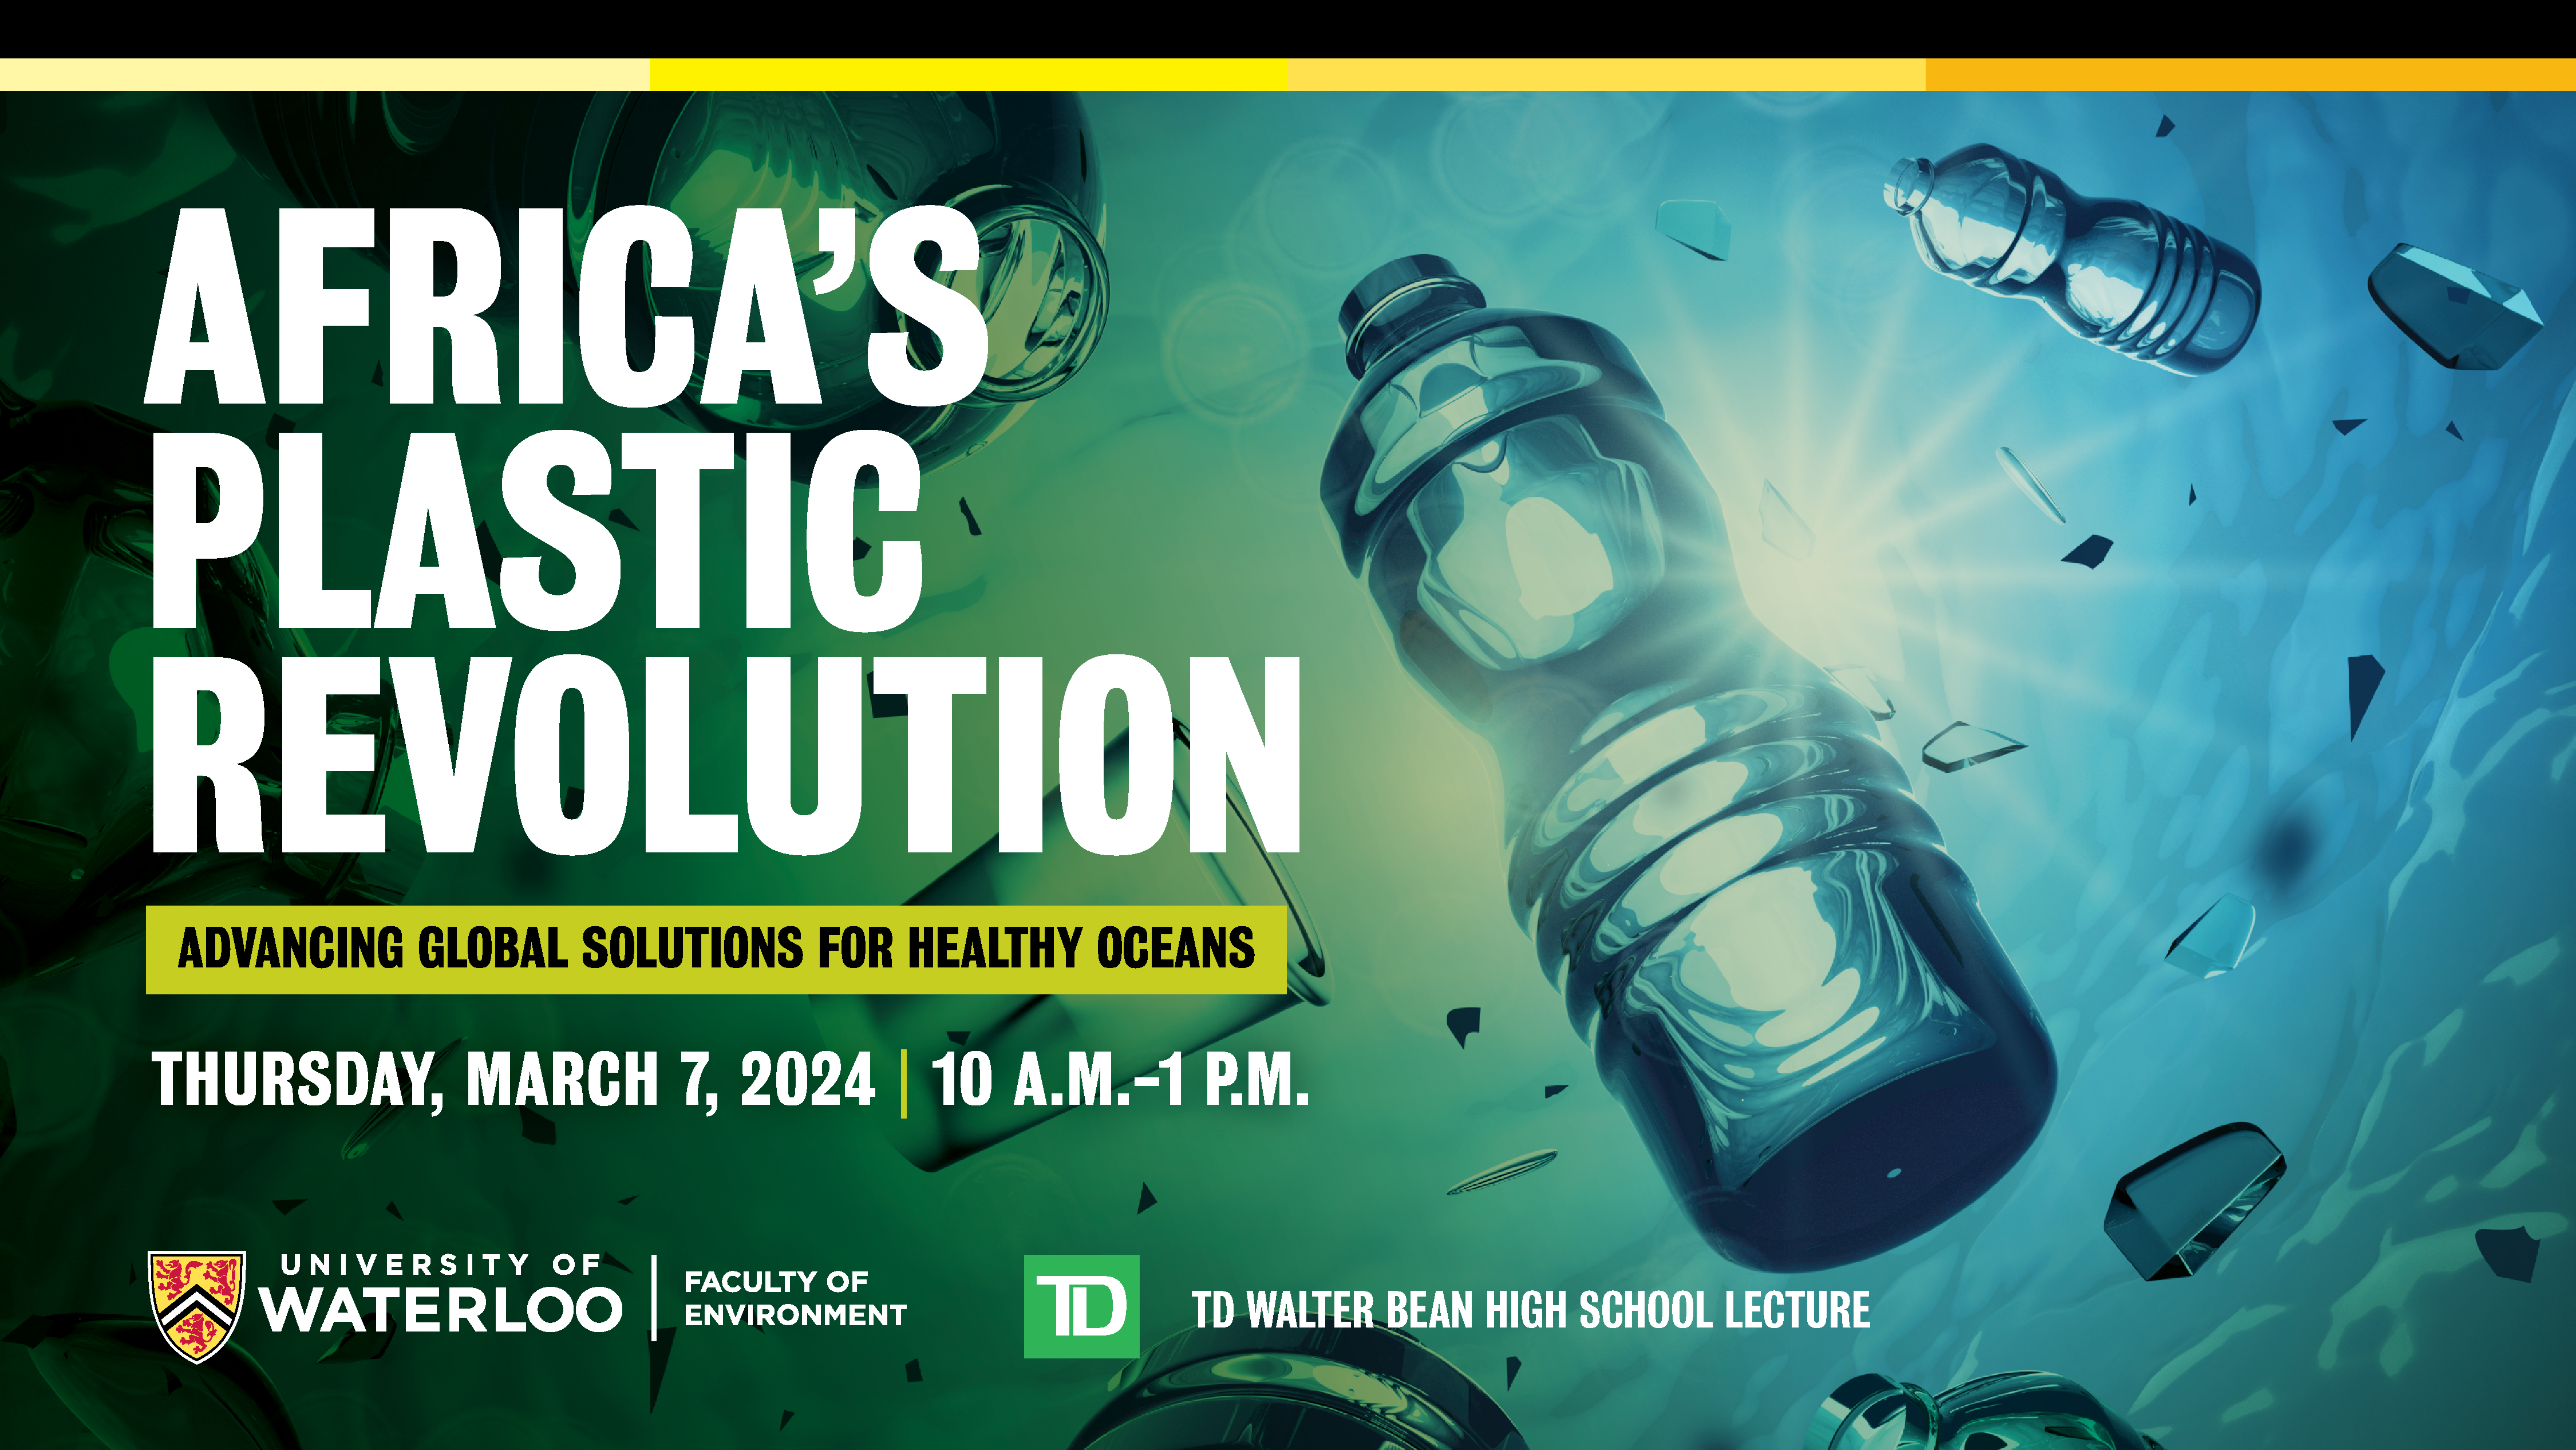 Africa's Plastic Revolution: Advancing solutions for healthy oceans highschool lecture